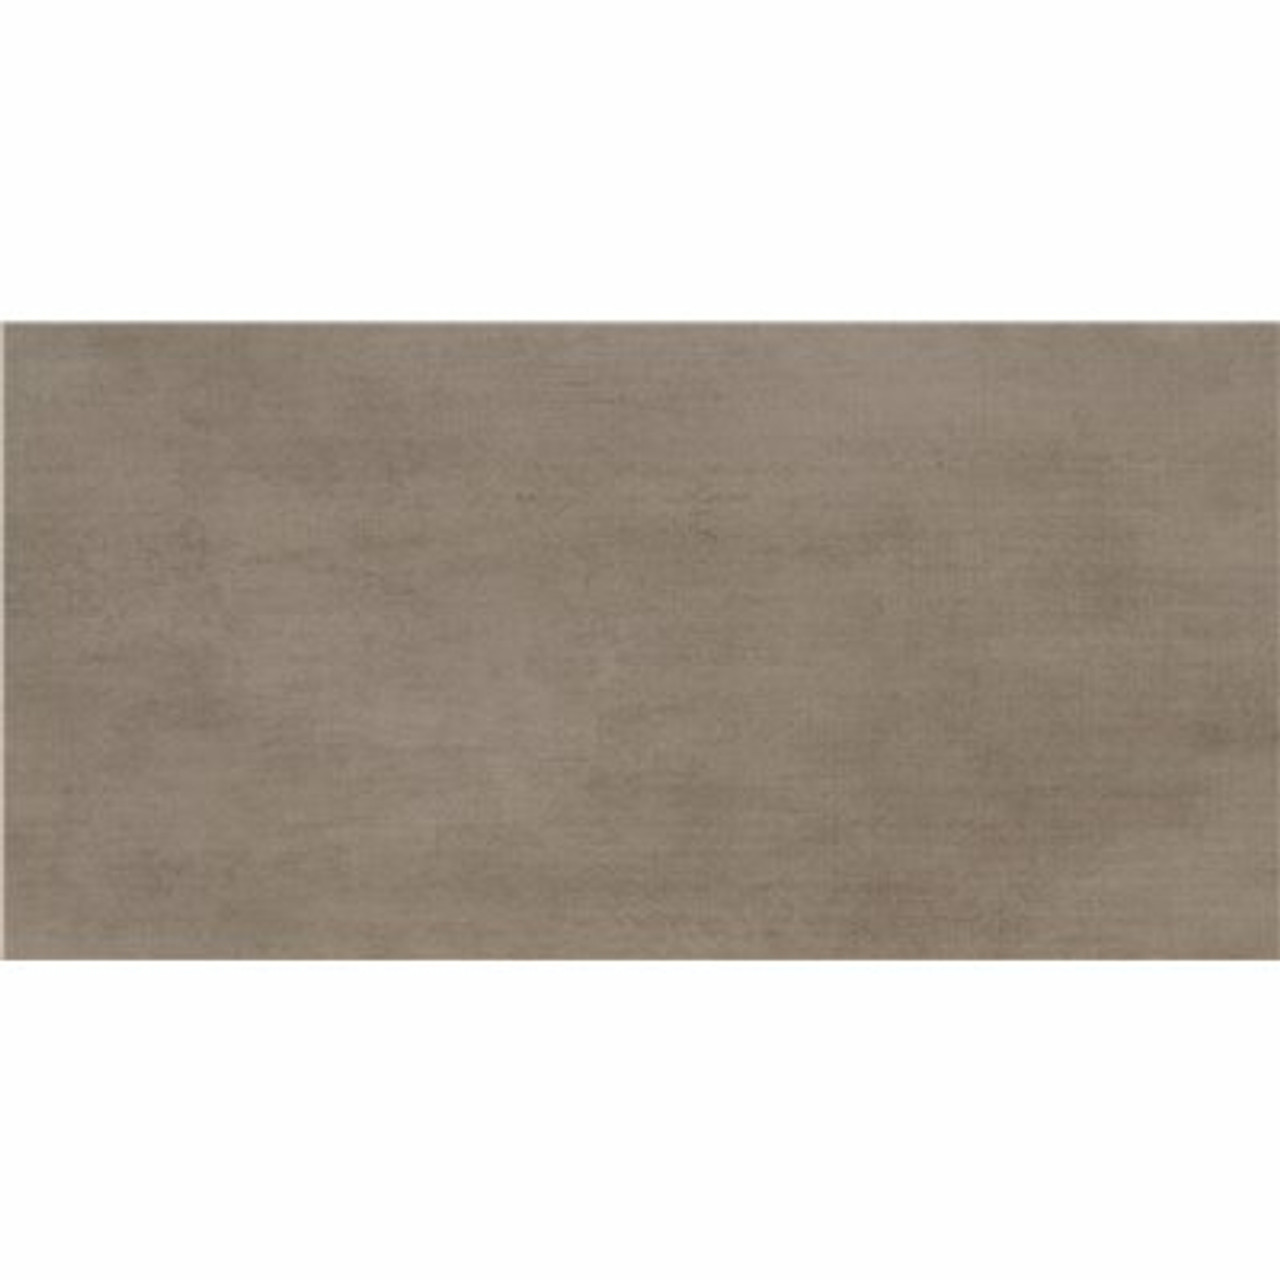 Msi Gridscale Concrete 12 In. X 24 In. Matte Ceramic Floor And Wall Tile (16 Sq. Ft./Case)